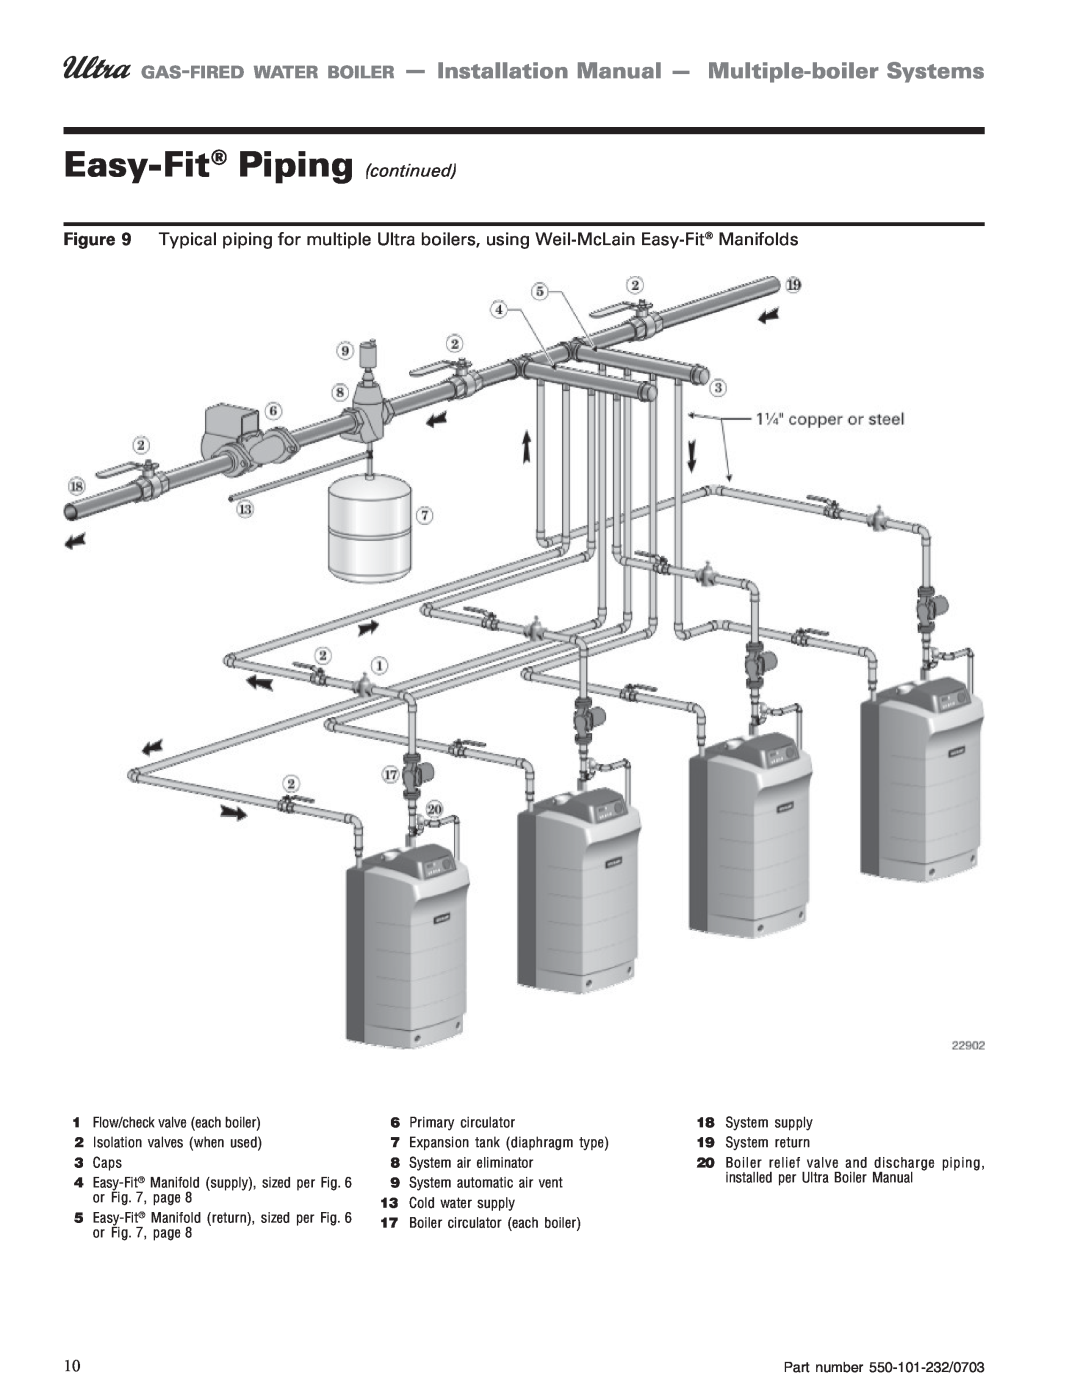 Weil-McLain Boiler installation manual Easy-Fit Piping continued 